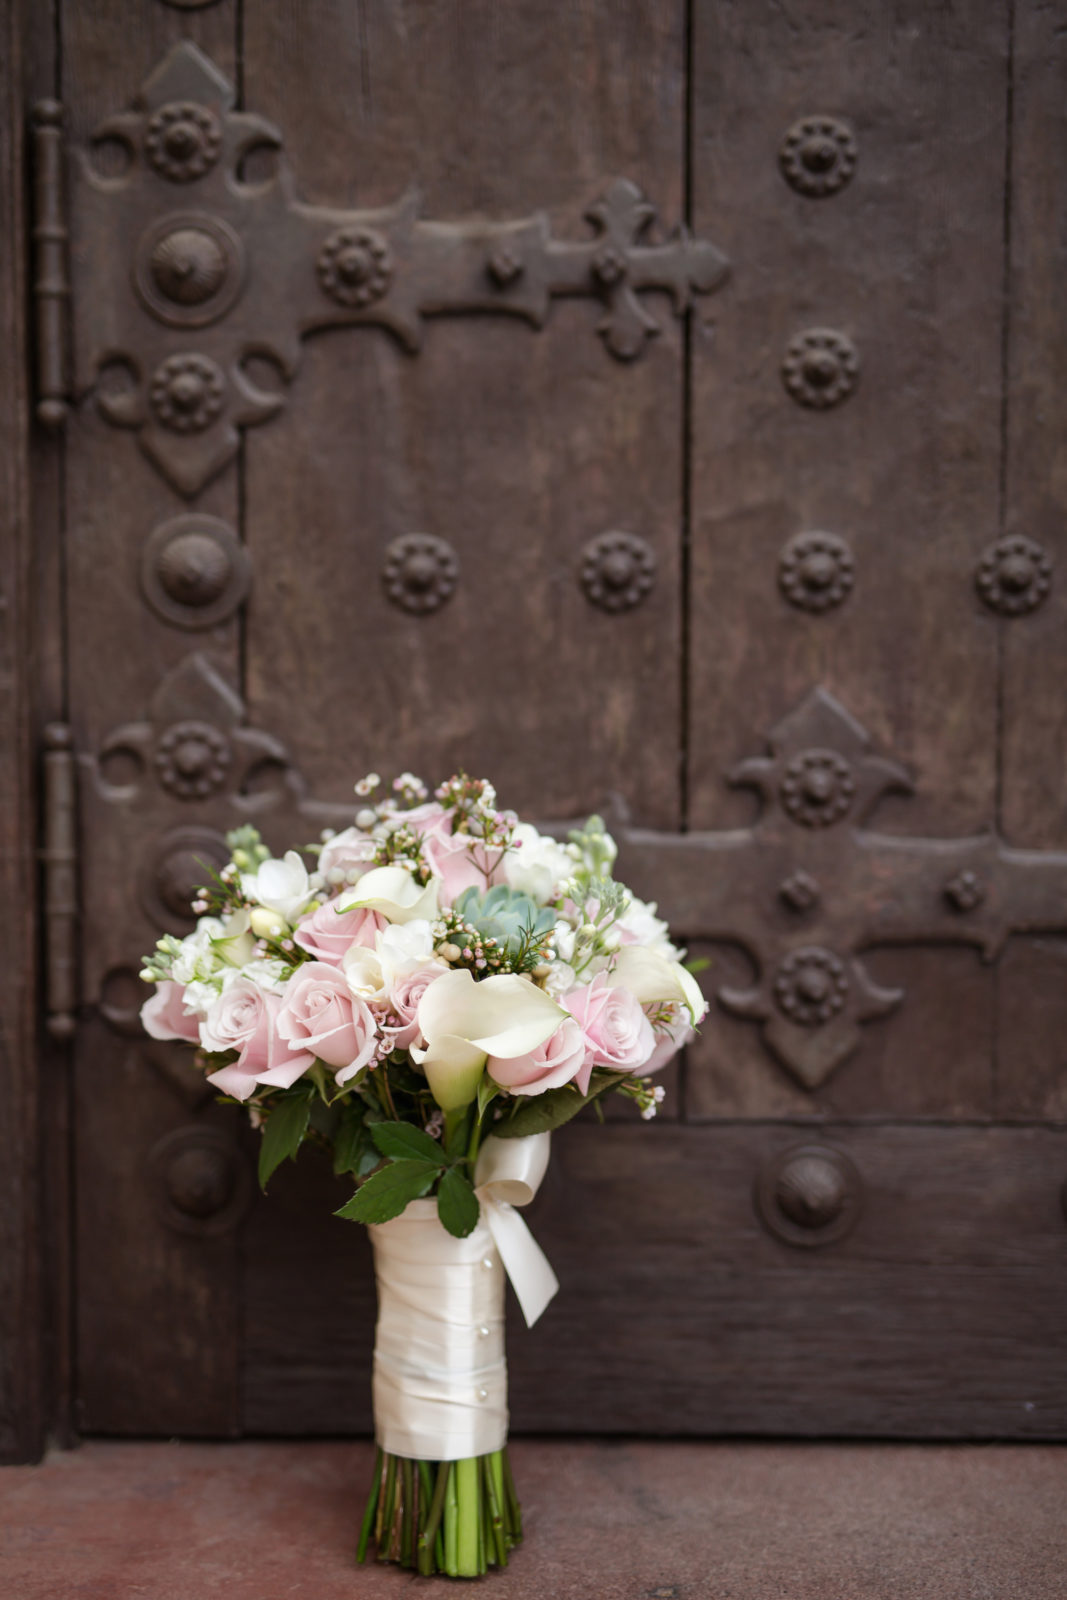 5 Things You Need to Know about Your Wedding Bouquet